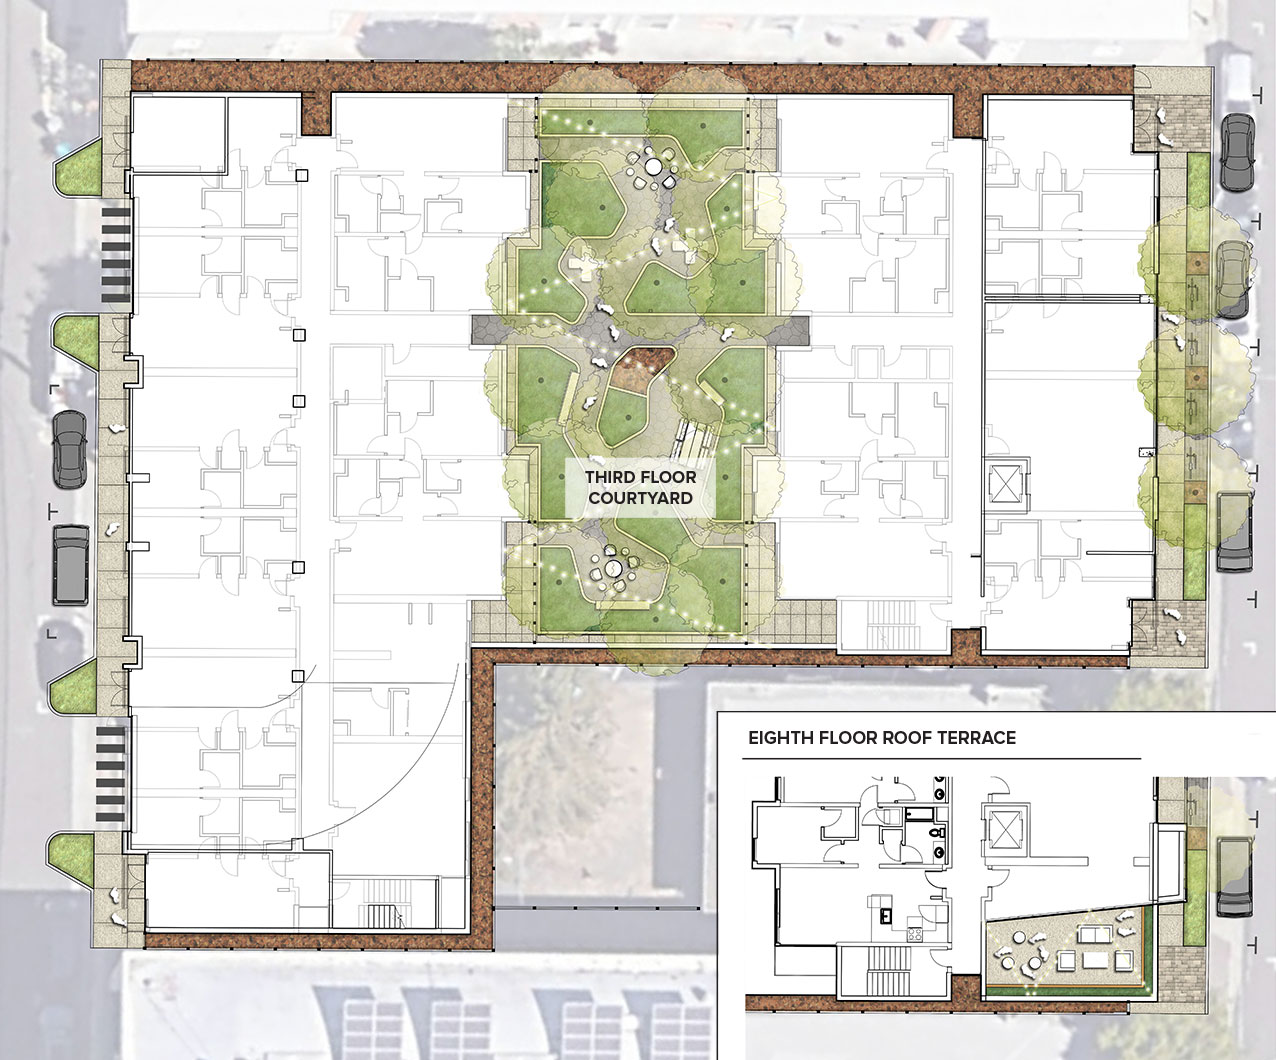 425 Humboldt Street Apartments Site Plan graphic showing 3rd floor courtyard and 8th floor roof terrace